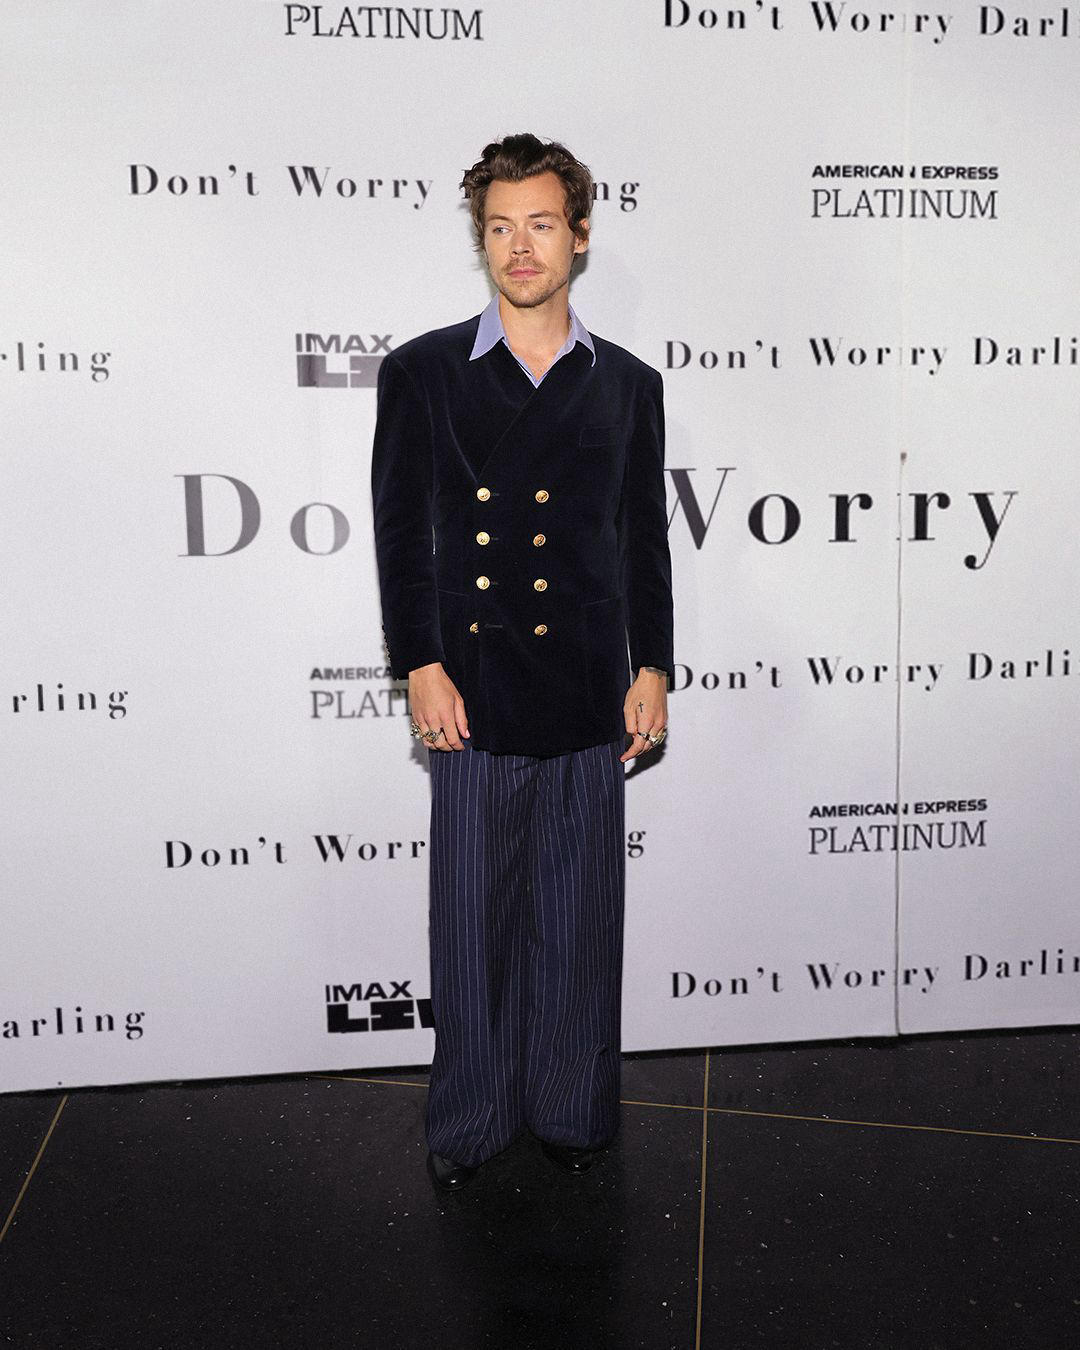 Harry Styles was captured wearing a sartorial look from the Exquisite Gucci collection at the screen